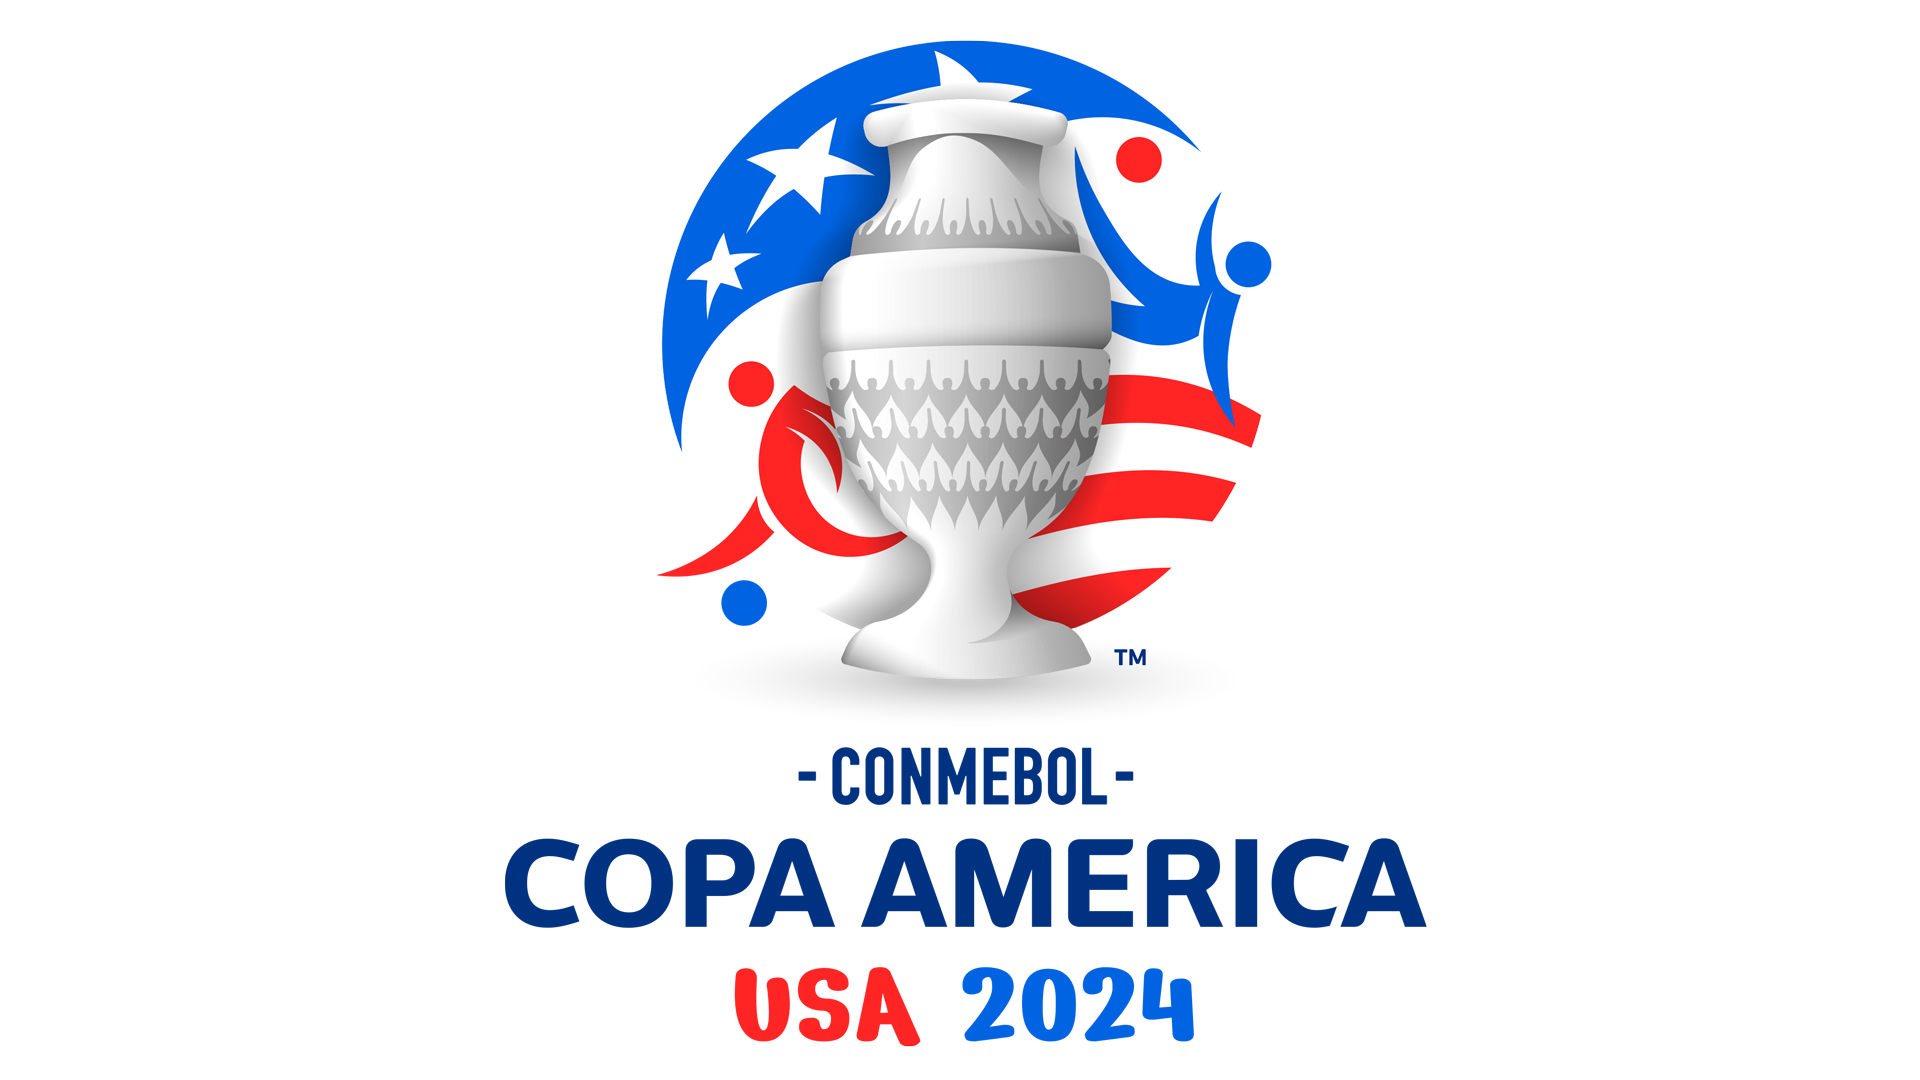 Atlanta to Host the Opening Match of Copa America 2024